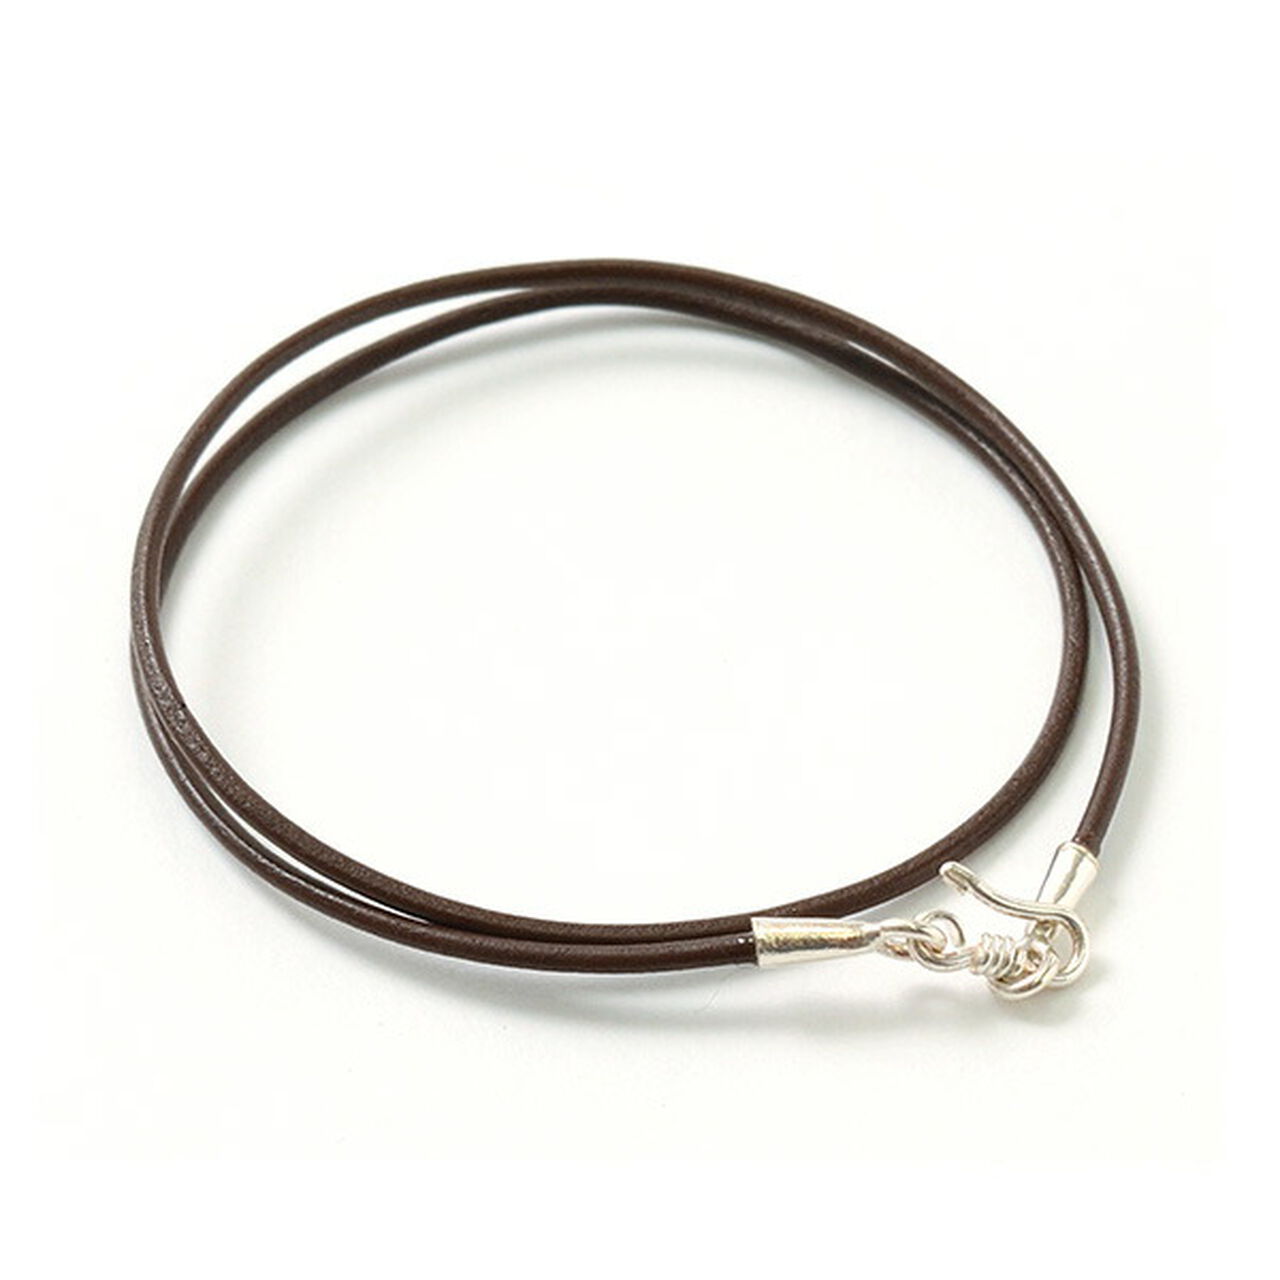 Leather choker necklace in calen silver.,Brown, large image number 0